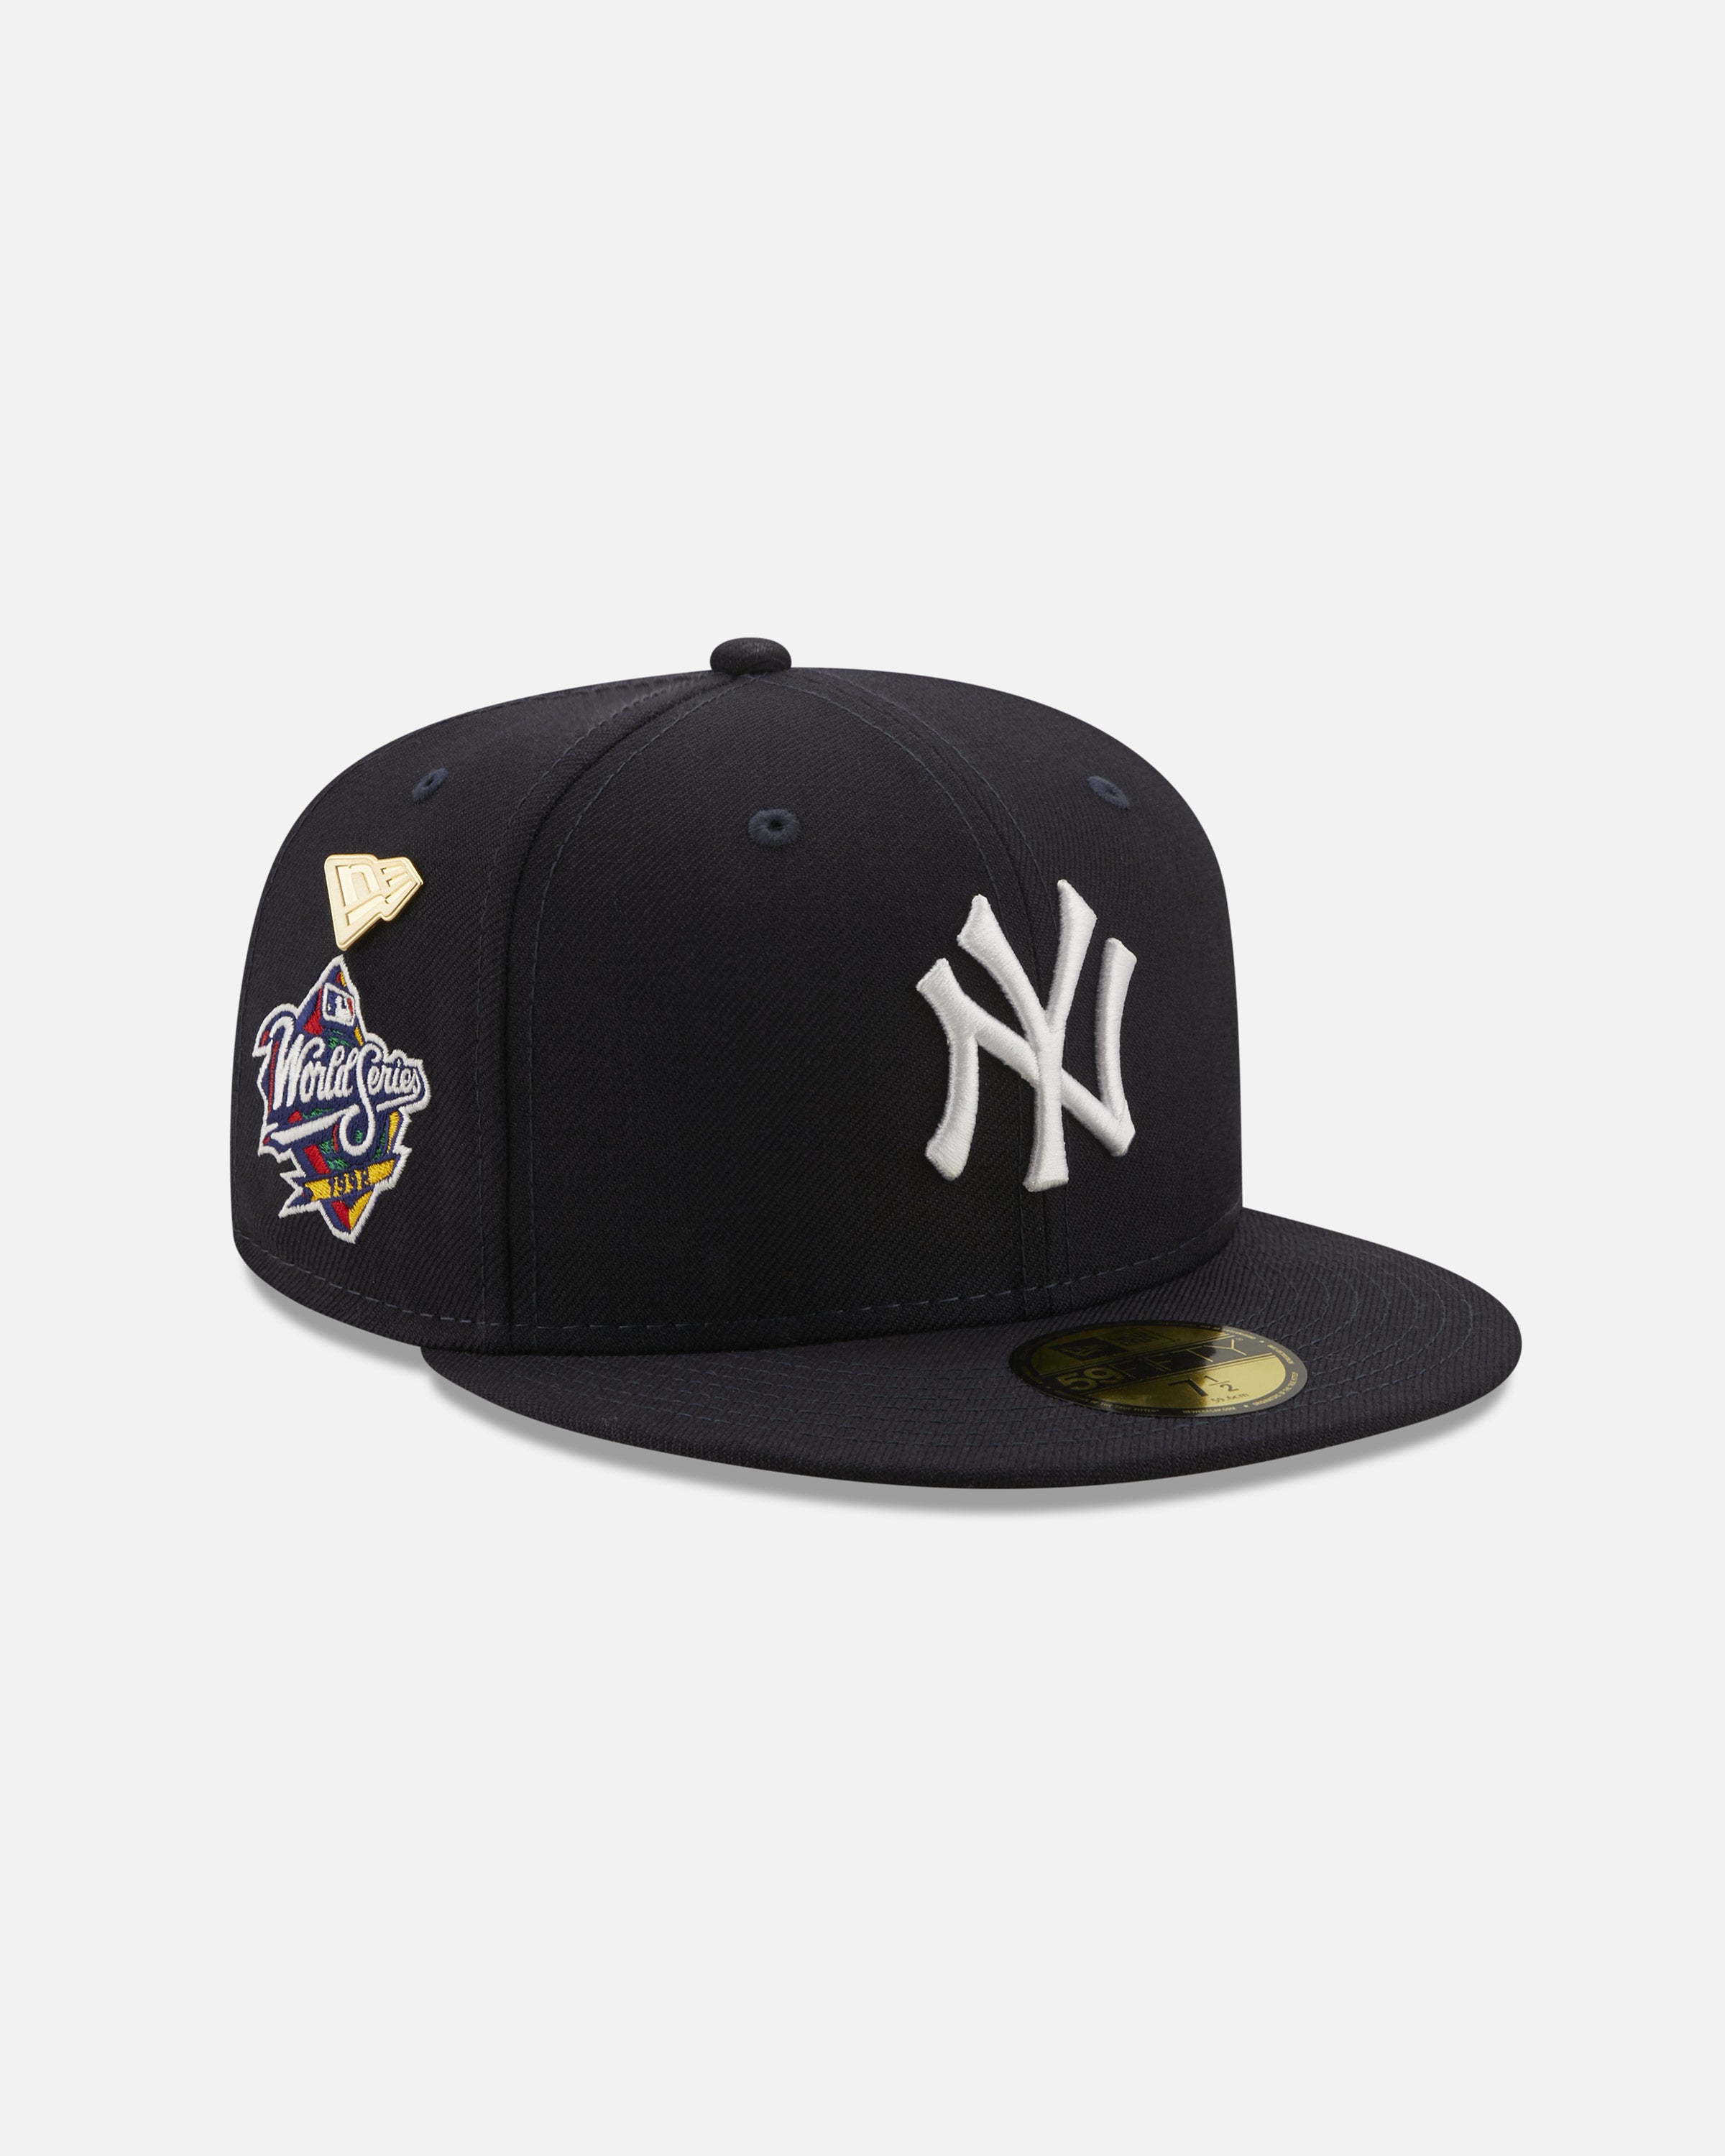 NEW ERA LOGO HISTORY 59FIFTY FITTED - NEW YORK YANKEES (1998)